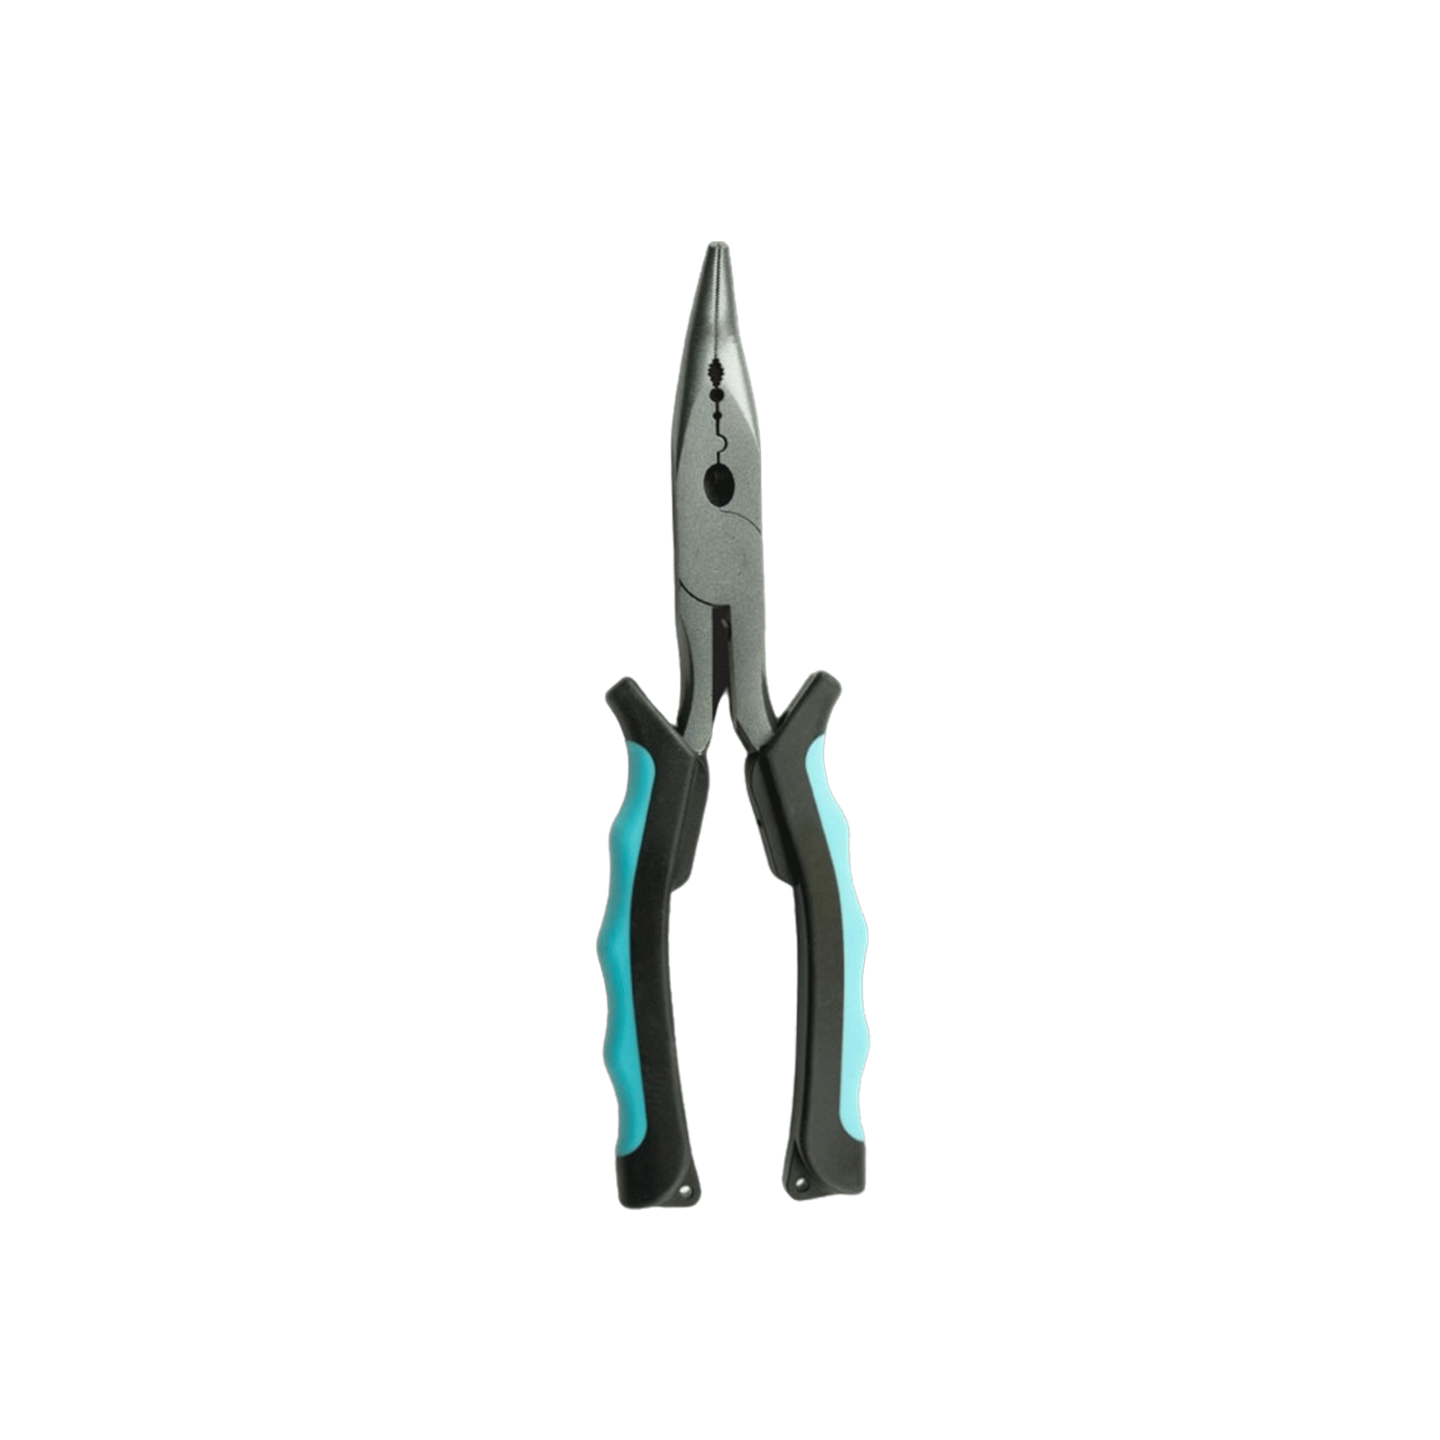 Multifunction pliers Hearty Rise